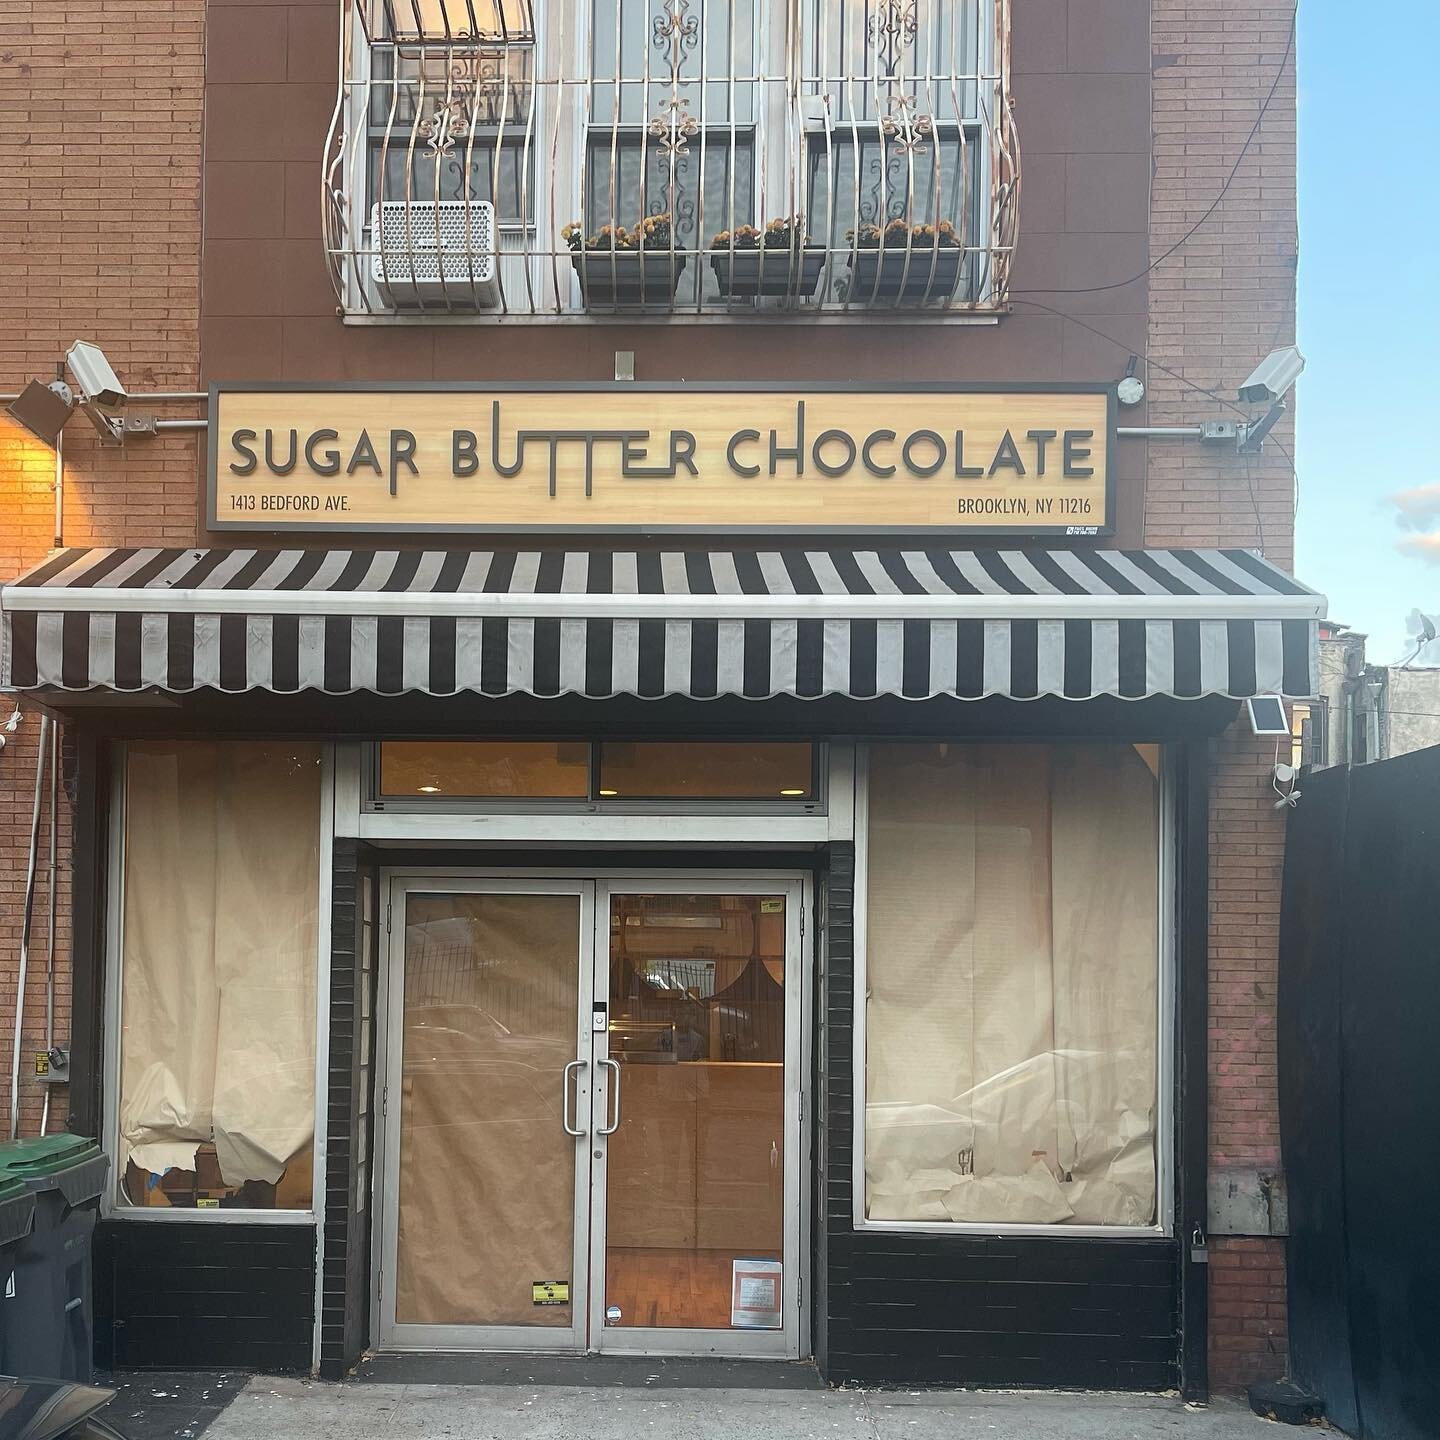 We have some BIG NEWS @sugarbutterchocolate 😊

We are super excited to announce that we have finally opened our very own brick &amp; mortar Pastry Studio &amp; Commercial Kitchen. 

We are still finishing up some design details, so there are no walk